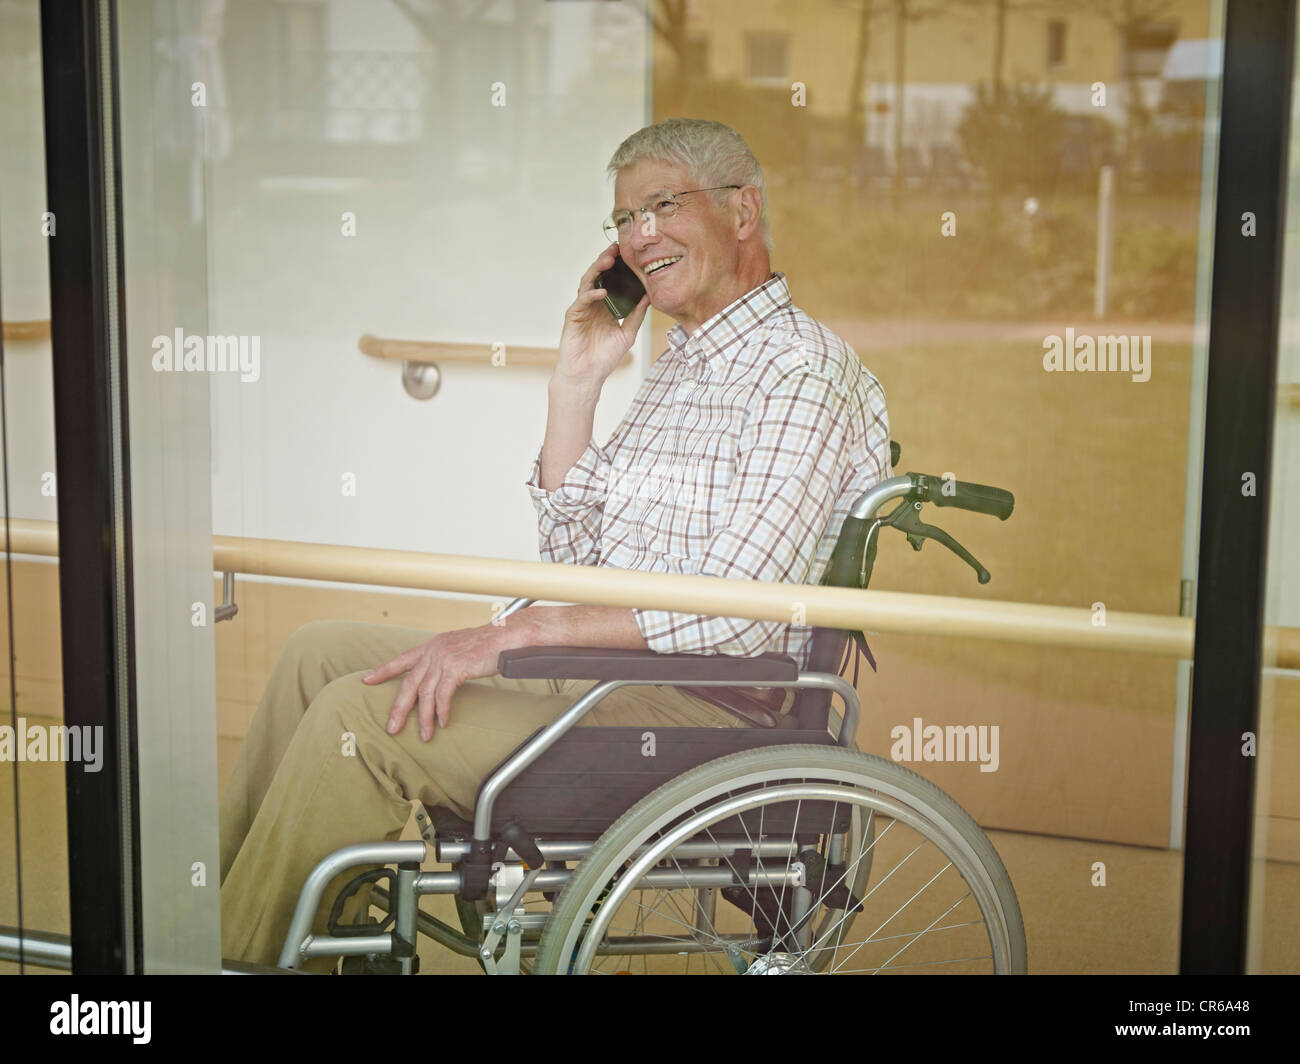 Germany, Cologne, Senior man on phone in nursing home, smiling Stock Photo